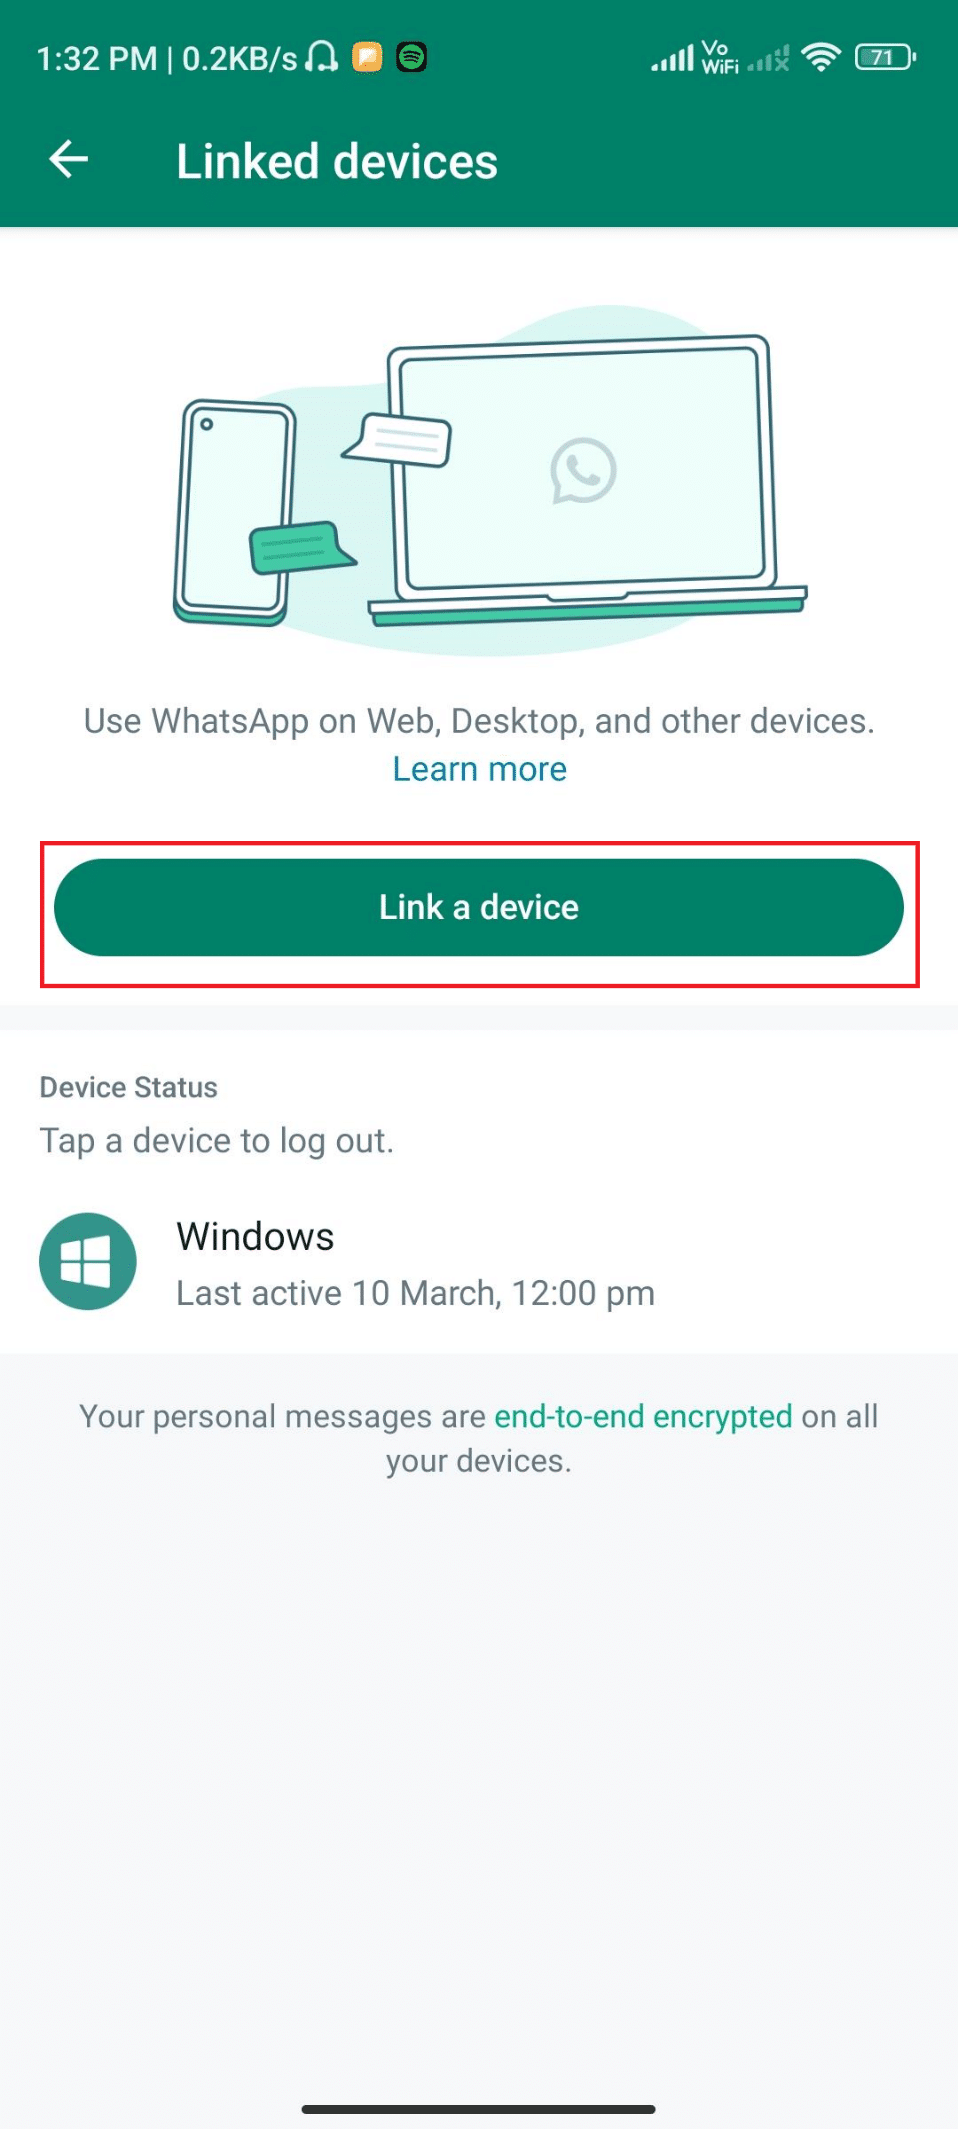 Link a device. on whatsapp